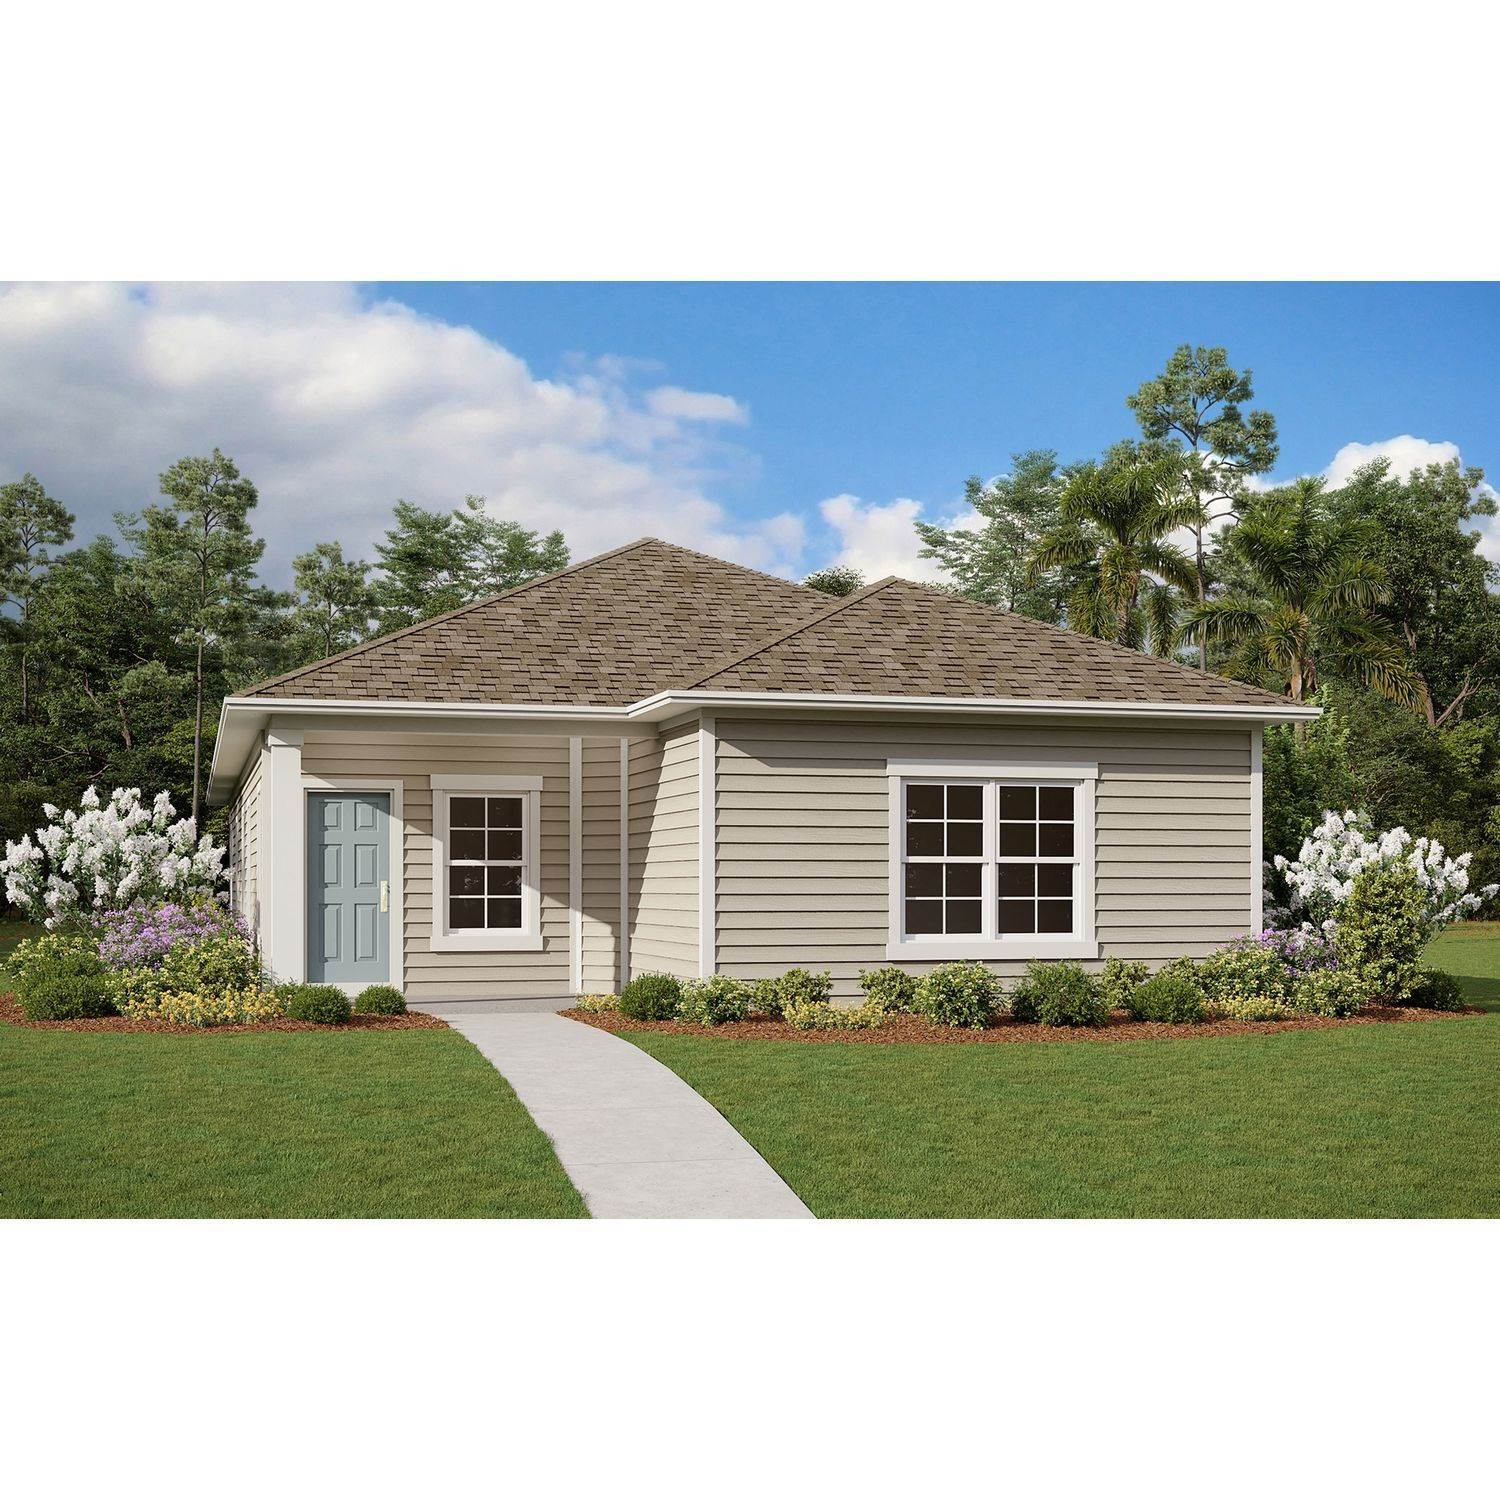 Single Family for Sale at Yulee, FL 32097